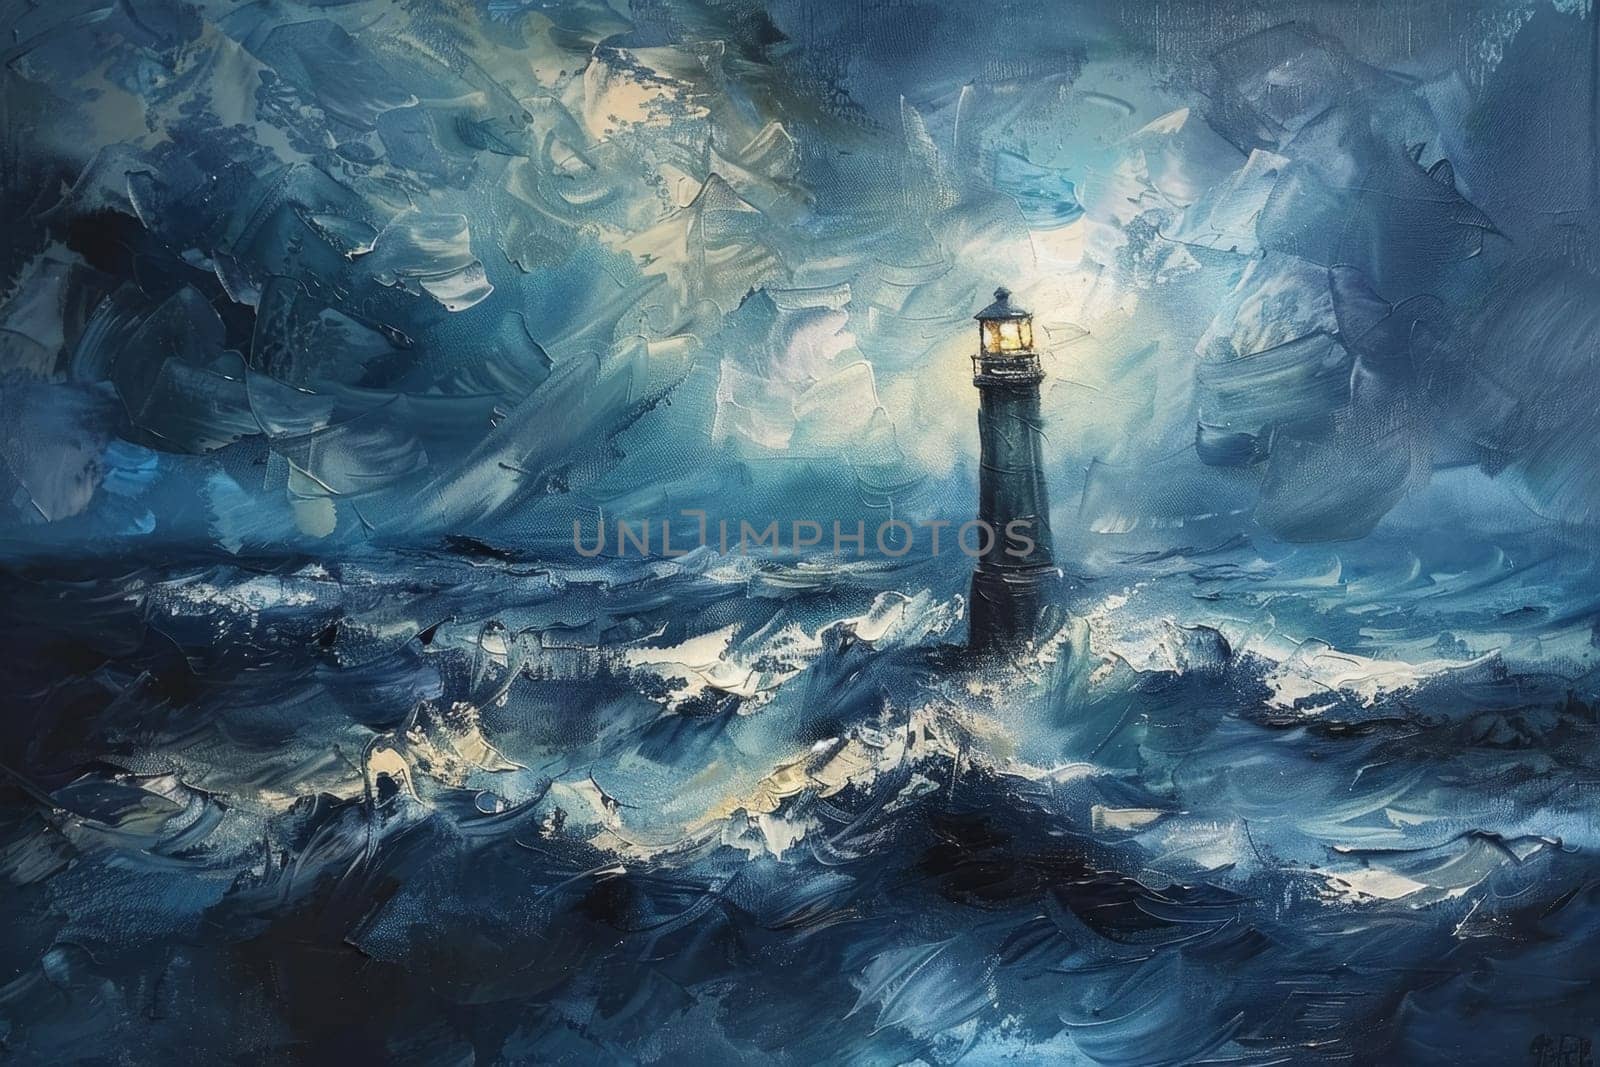 A tempestuous sea swirls around a steadfast lighthouse in this dynamic expressionist painting, rich with textured brushstrokes and a moody palette